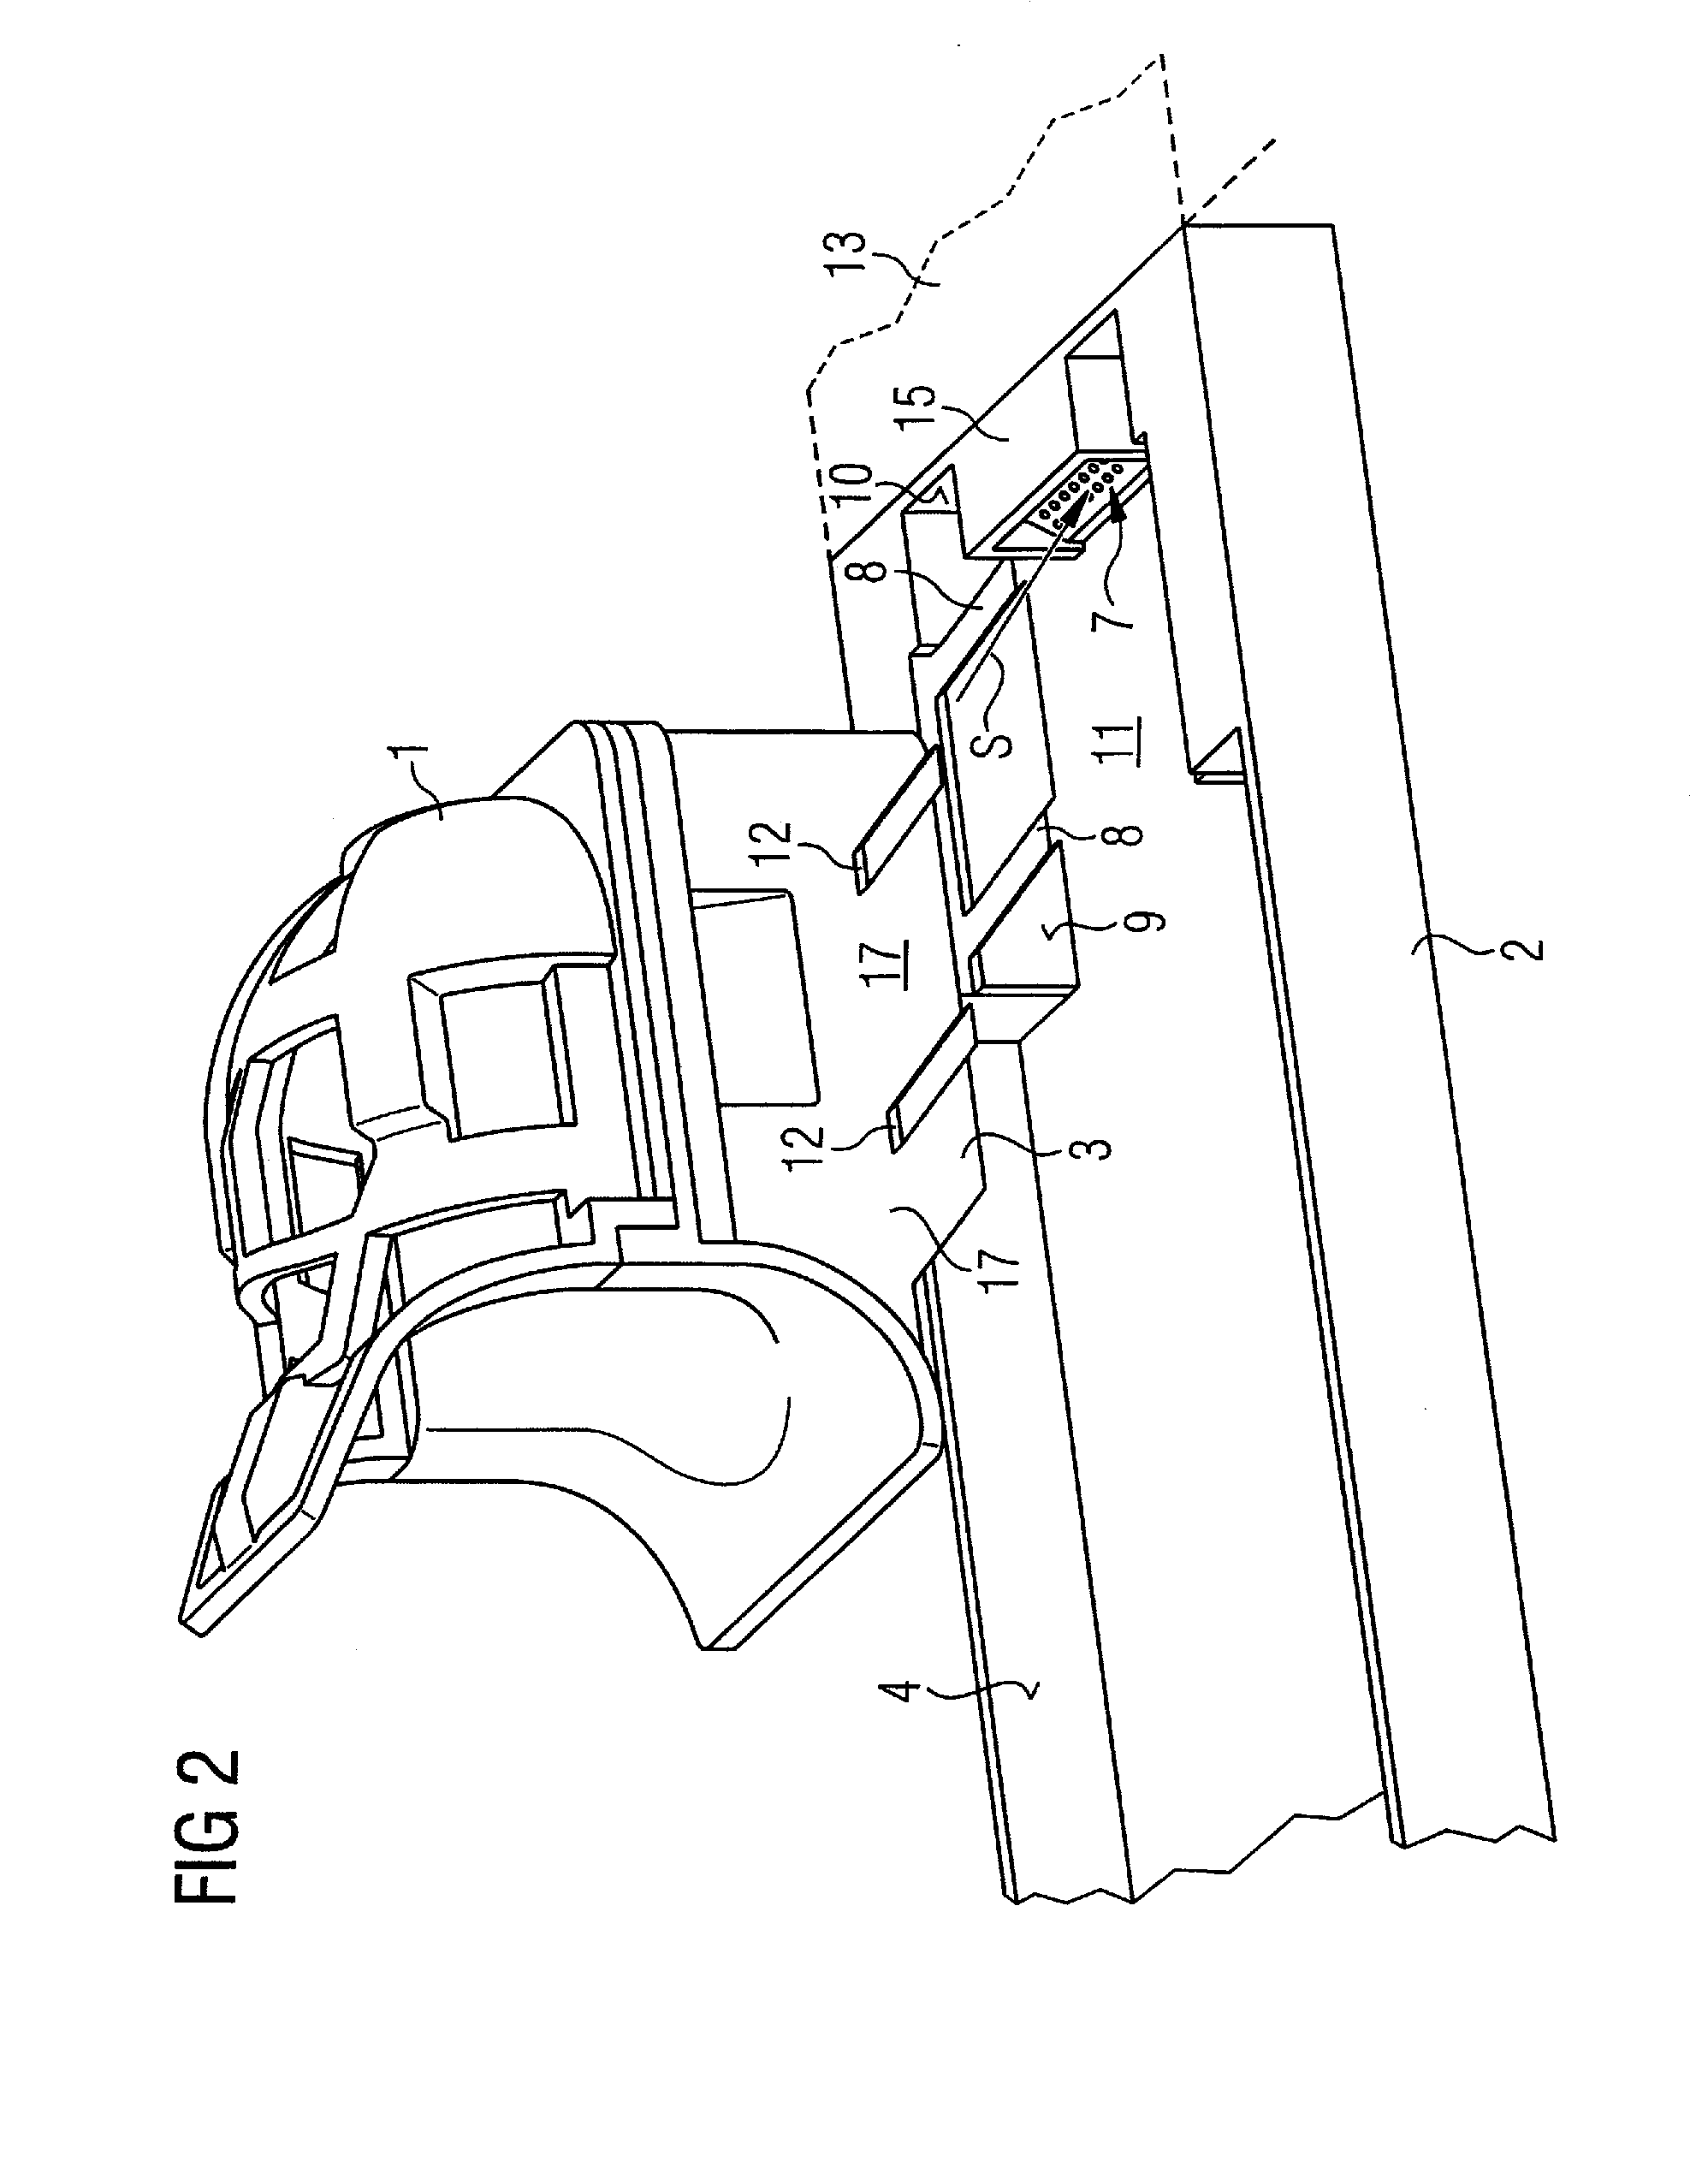 Local coil arrangement for magnetic resonance applications and patient bed for a magnetic resonance system, with integrated electrical interfaces